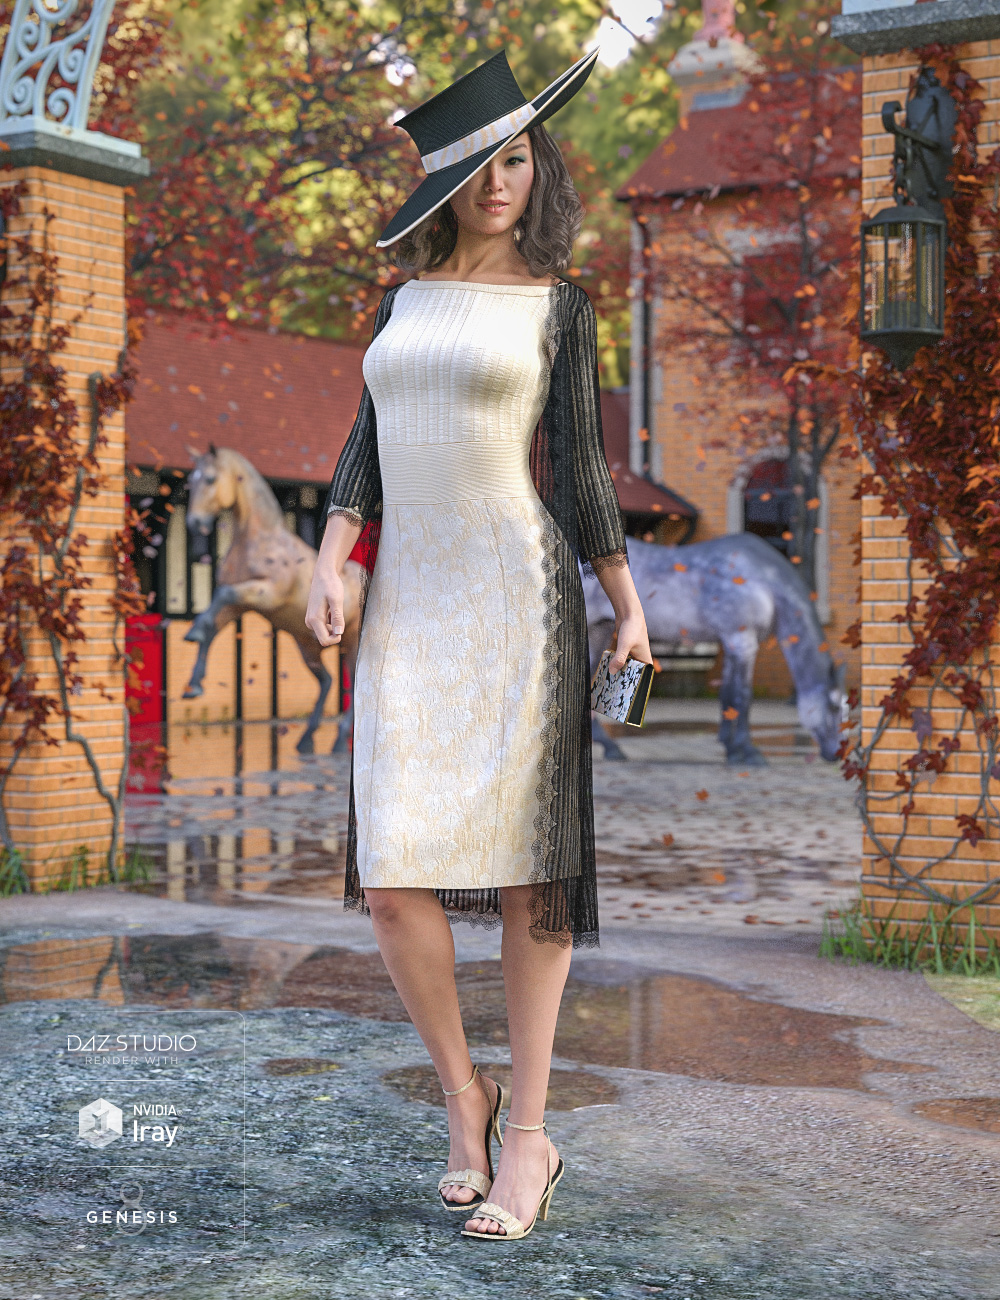 dForce Epsom Downs Outfit Textures by: DirtyFairy, 3D Models by Daz 3D